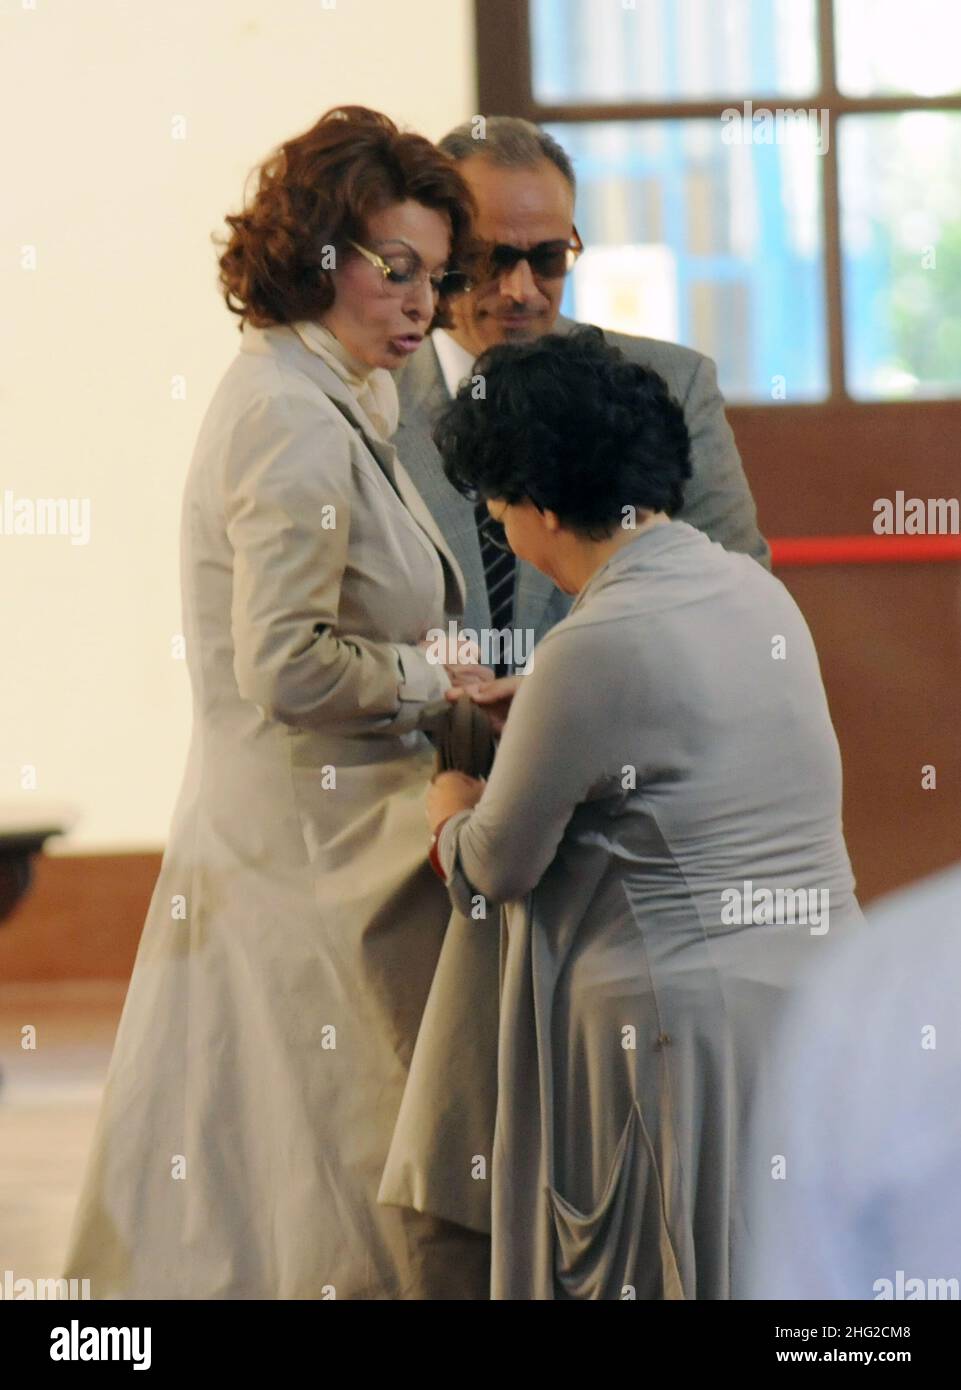 ©Eddy / lapresse 25-09-2009 Rome, Italy It is shooting the film 'Una Casa Piena di Specchi '(A house full of mirrors): the filmÍs protagonist is Sophia Loren, who plays the role of Romilda Villani that is SophiaÍs mother. In the pictures, we can see her to direct on the set together with the actor Enzo De Caro, who plays the role of RomildaÍs husband; then while preparing themselves to shoot a scene.   ©Eddy / lapresse 25-09-2009 Roma, Italia spettacolo Sophia Loren sul set del film 'Una casa piena di specchi' Interprete principale Sophia Loren, che interpreta la parte di sua madre Romilda Vil Stock Photo